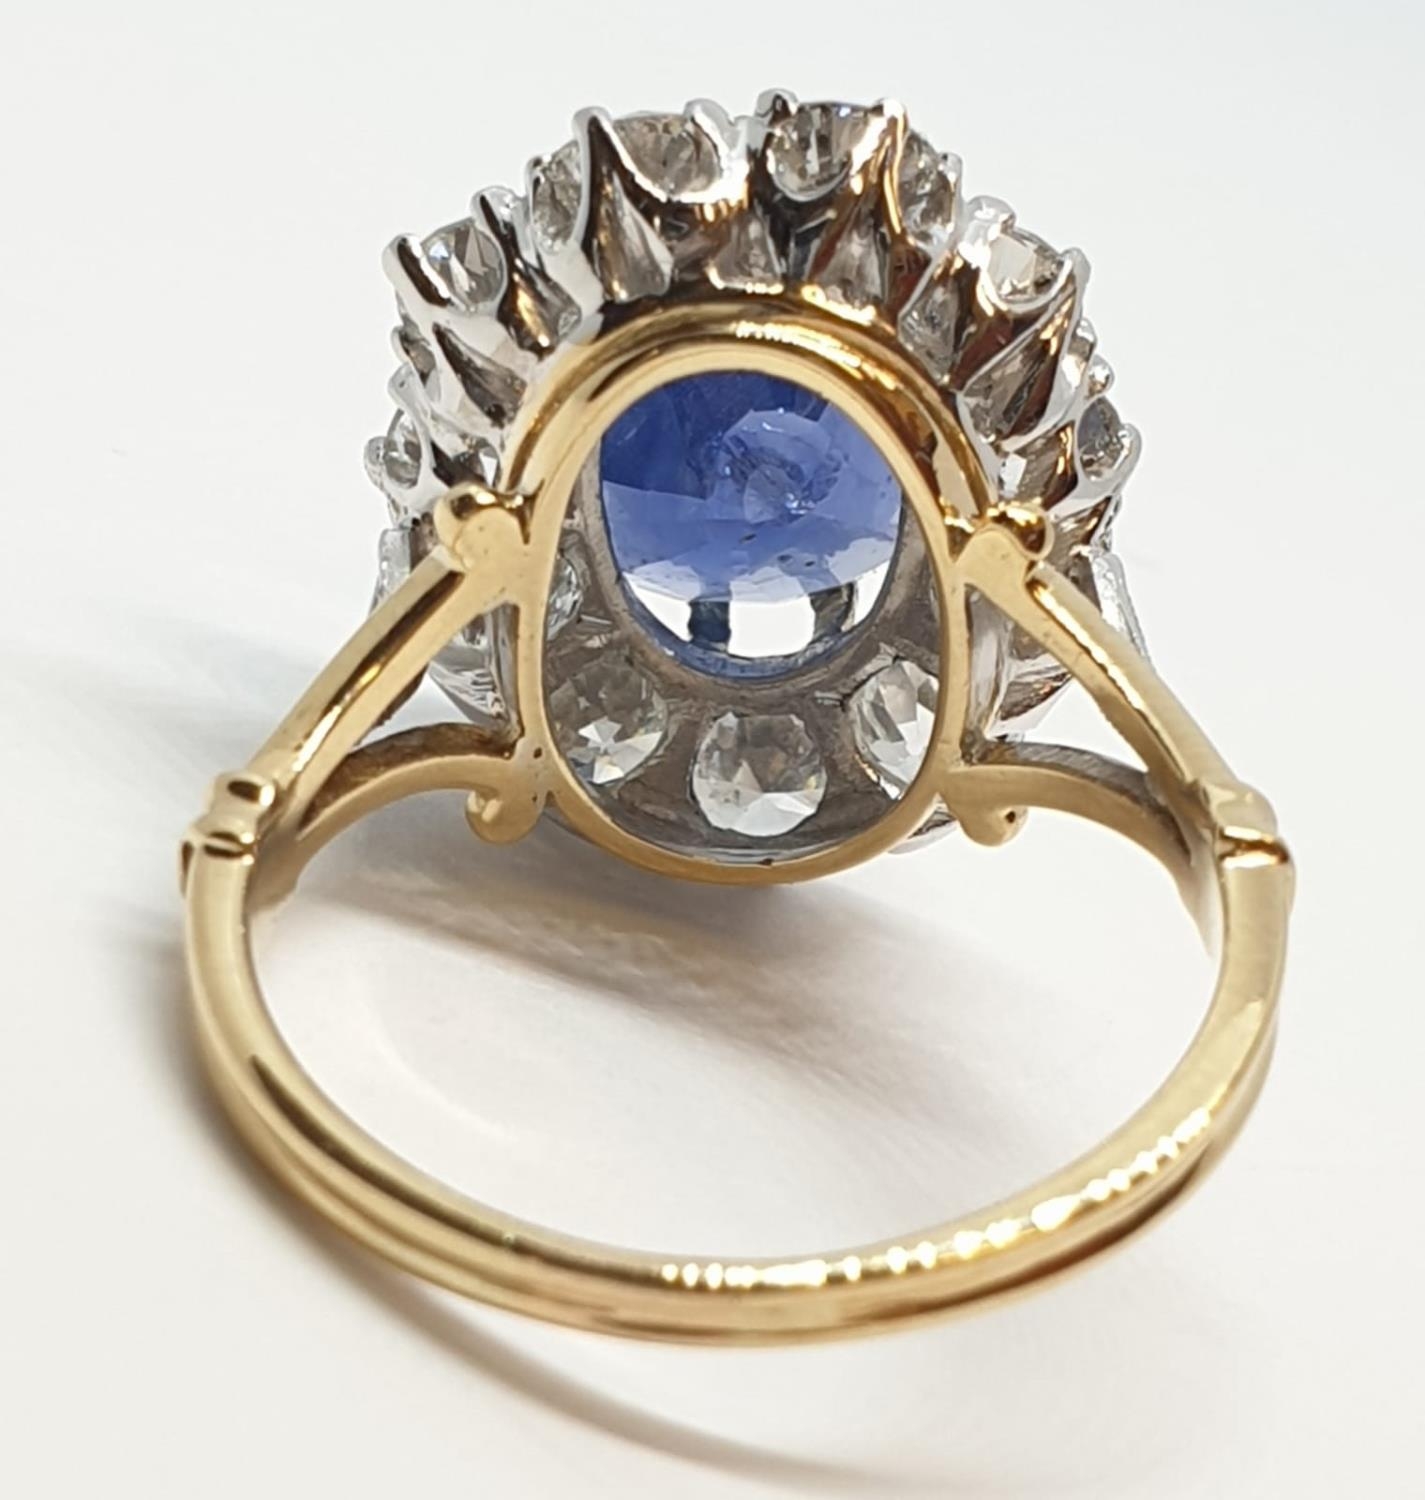 5.75ct sapphire ring set in white and yellow gold with over 3.5ct diamonds surrounding, weight 6. - Image 7 of 12